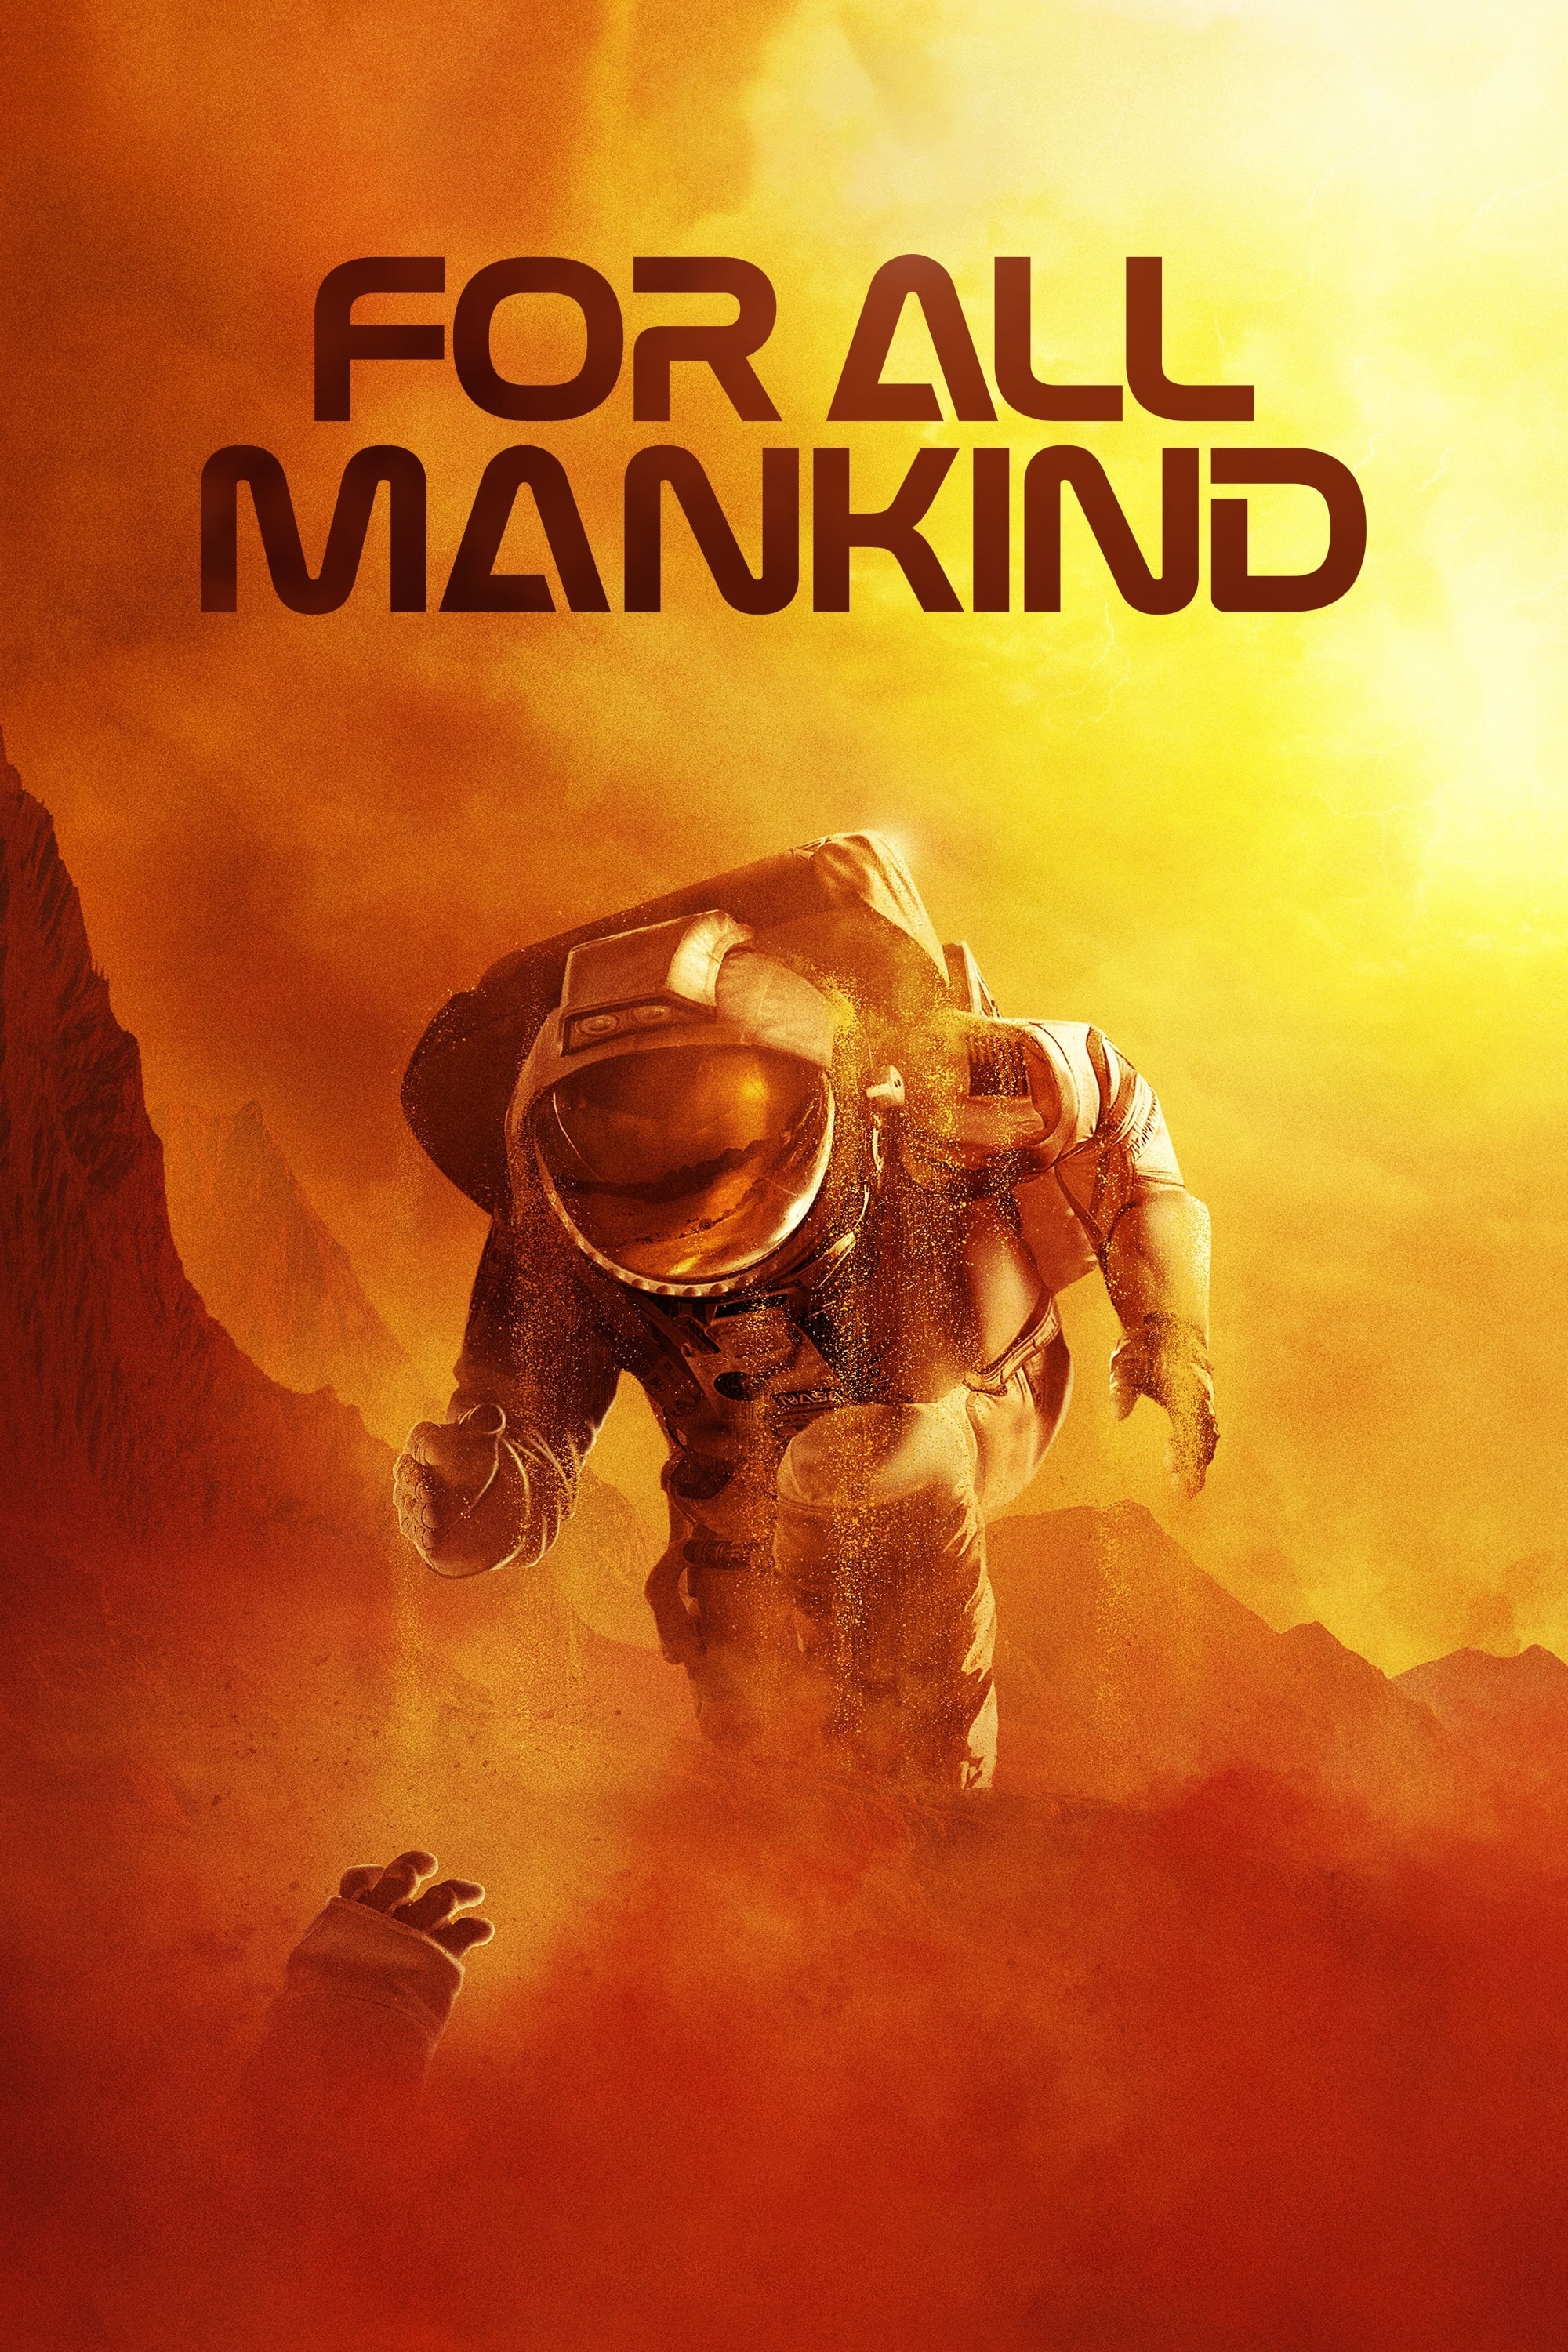 For All Mankind (TV Series), Alternative history, Space race, Astronauts' journey, 2000x3000 HD Phone